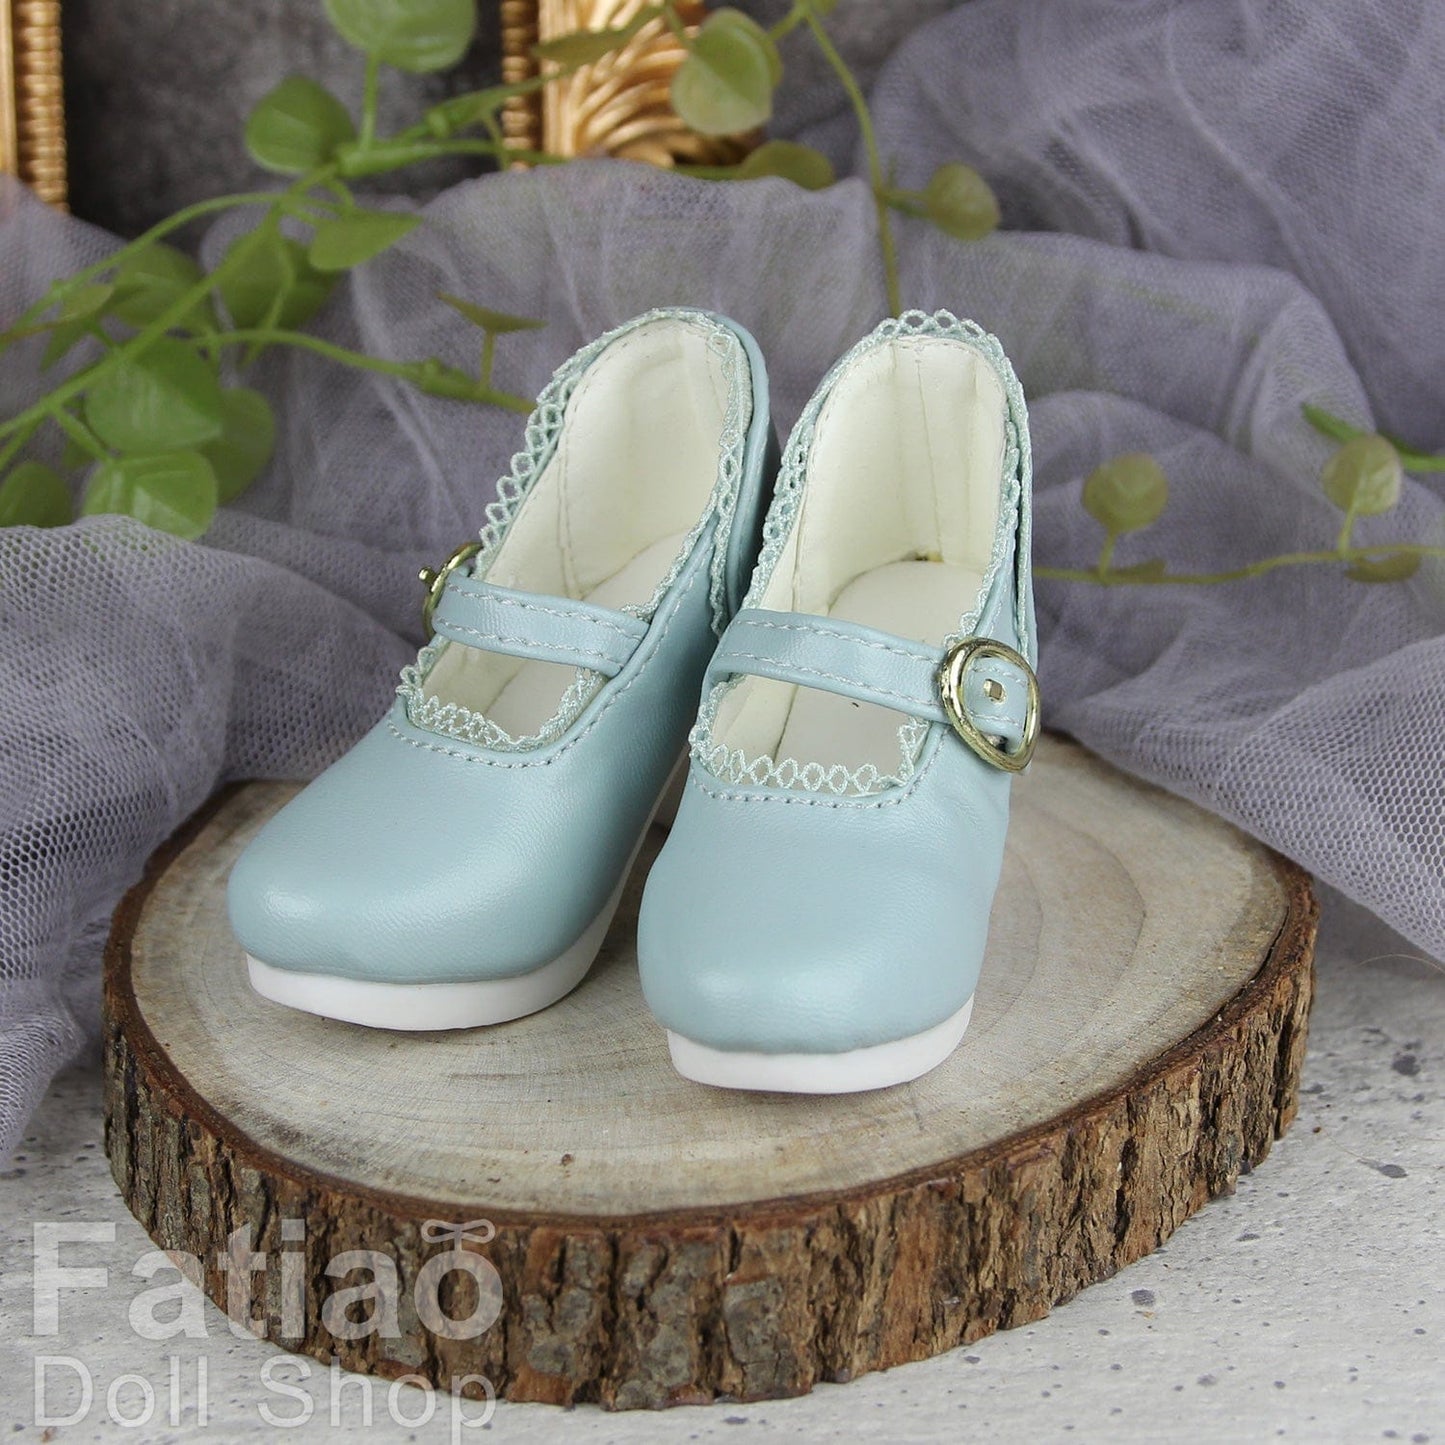 【Fatiao Doll Shop】Lace Thick High Heel C30 Multicolor / BJD SD10 SD13 DD 1/3 scale 